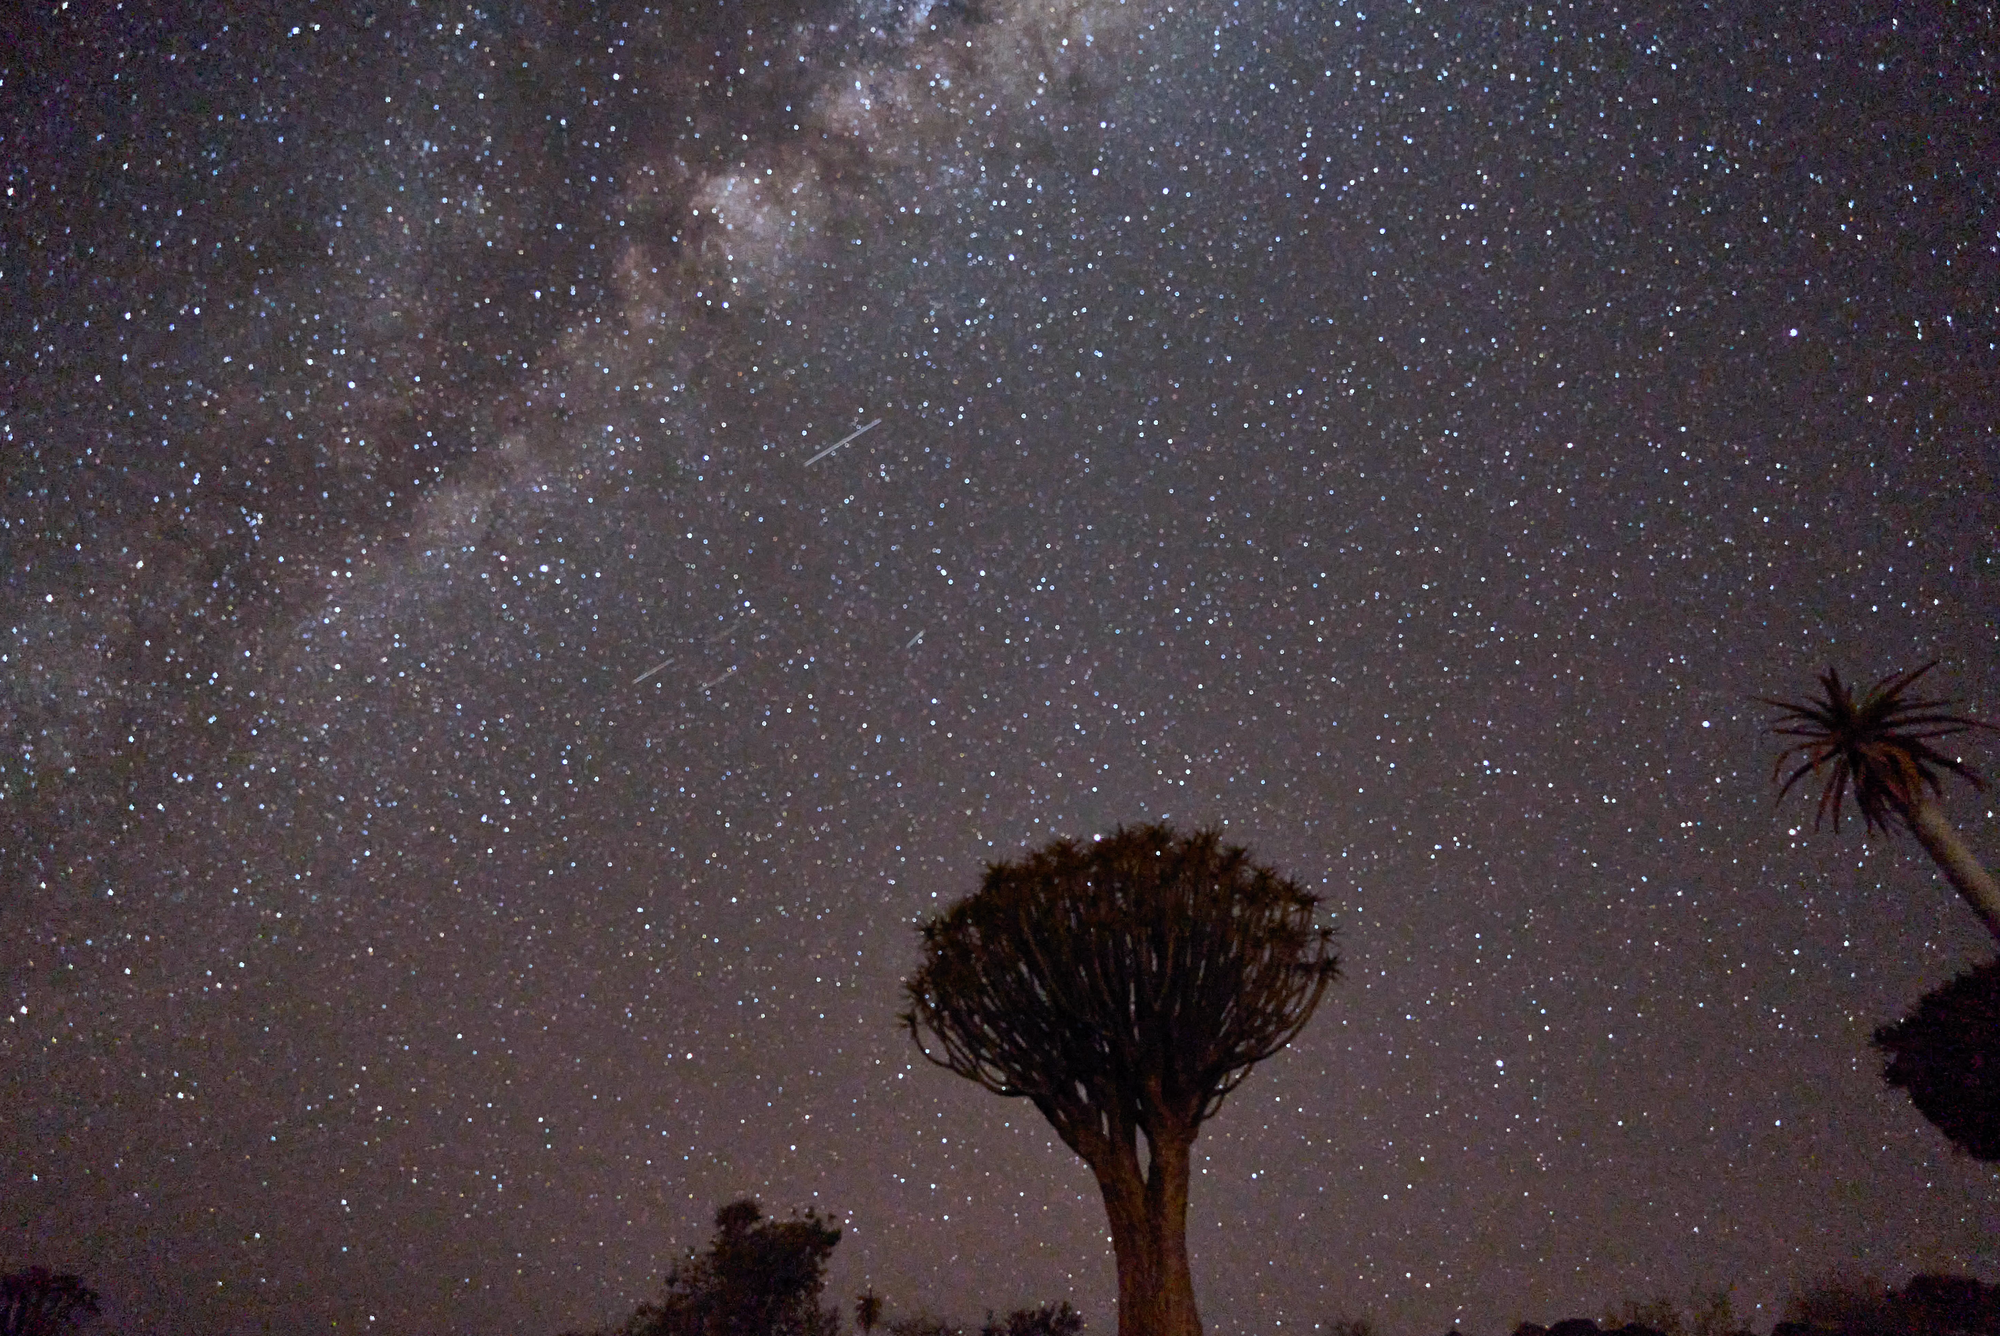 Milkyway time lapse at the Quivertree forest